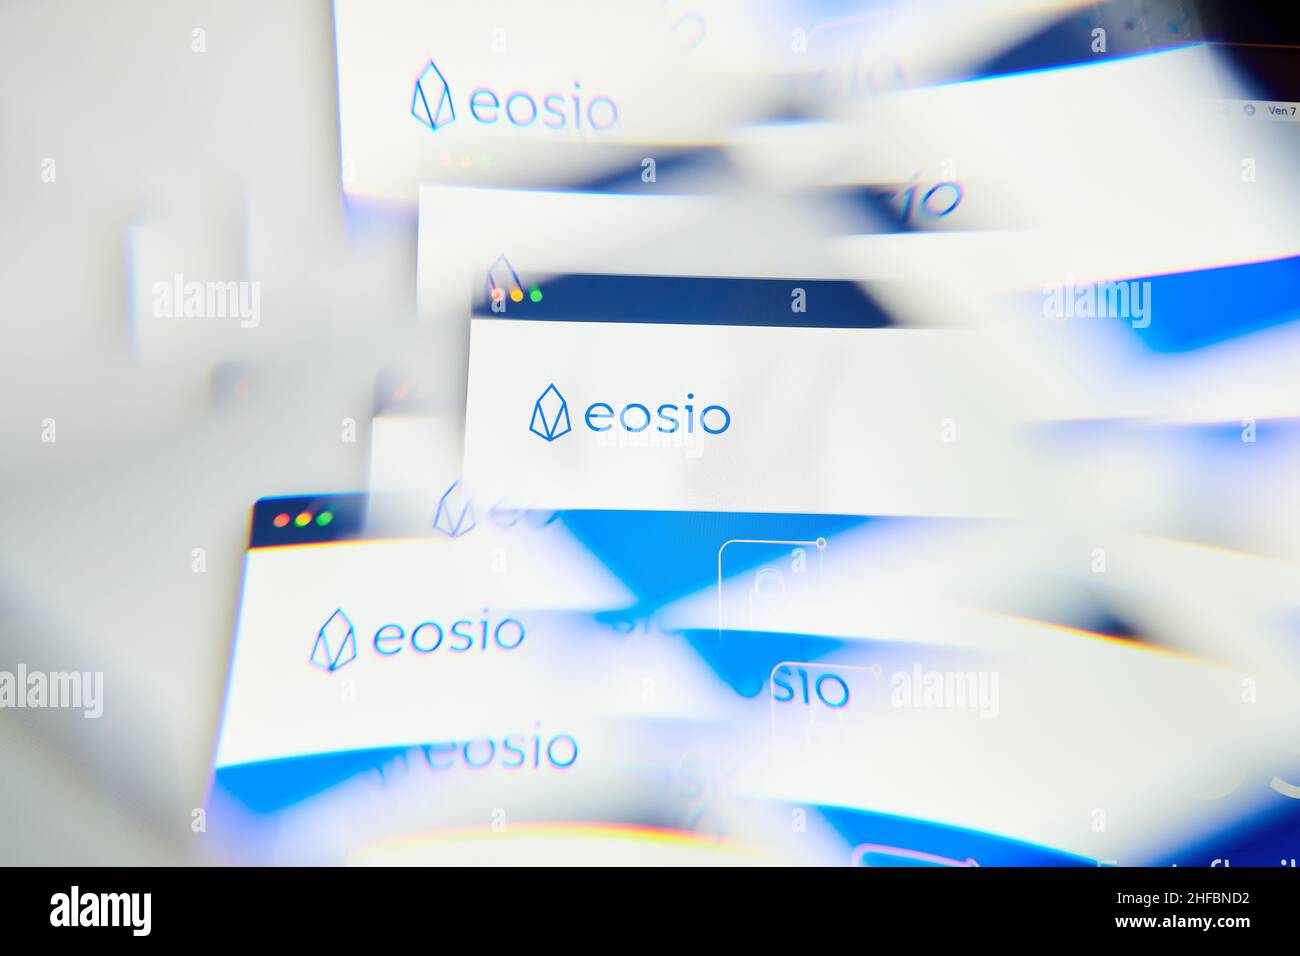 Milan, Italy - January 11, 2022: eos - EOS logo on laptop screen seen through an optical prism. Dynamic and unique image form eos, EOS coin website. I Stock Photo